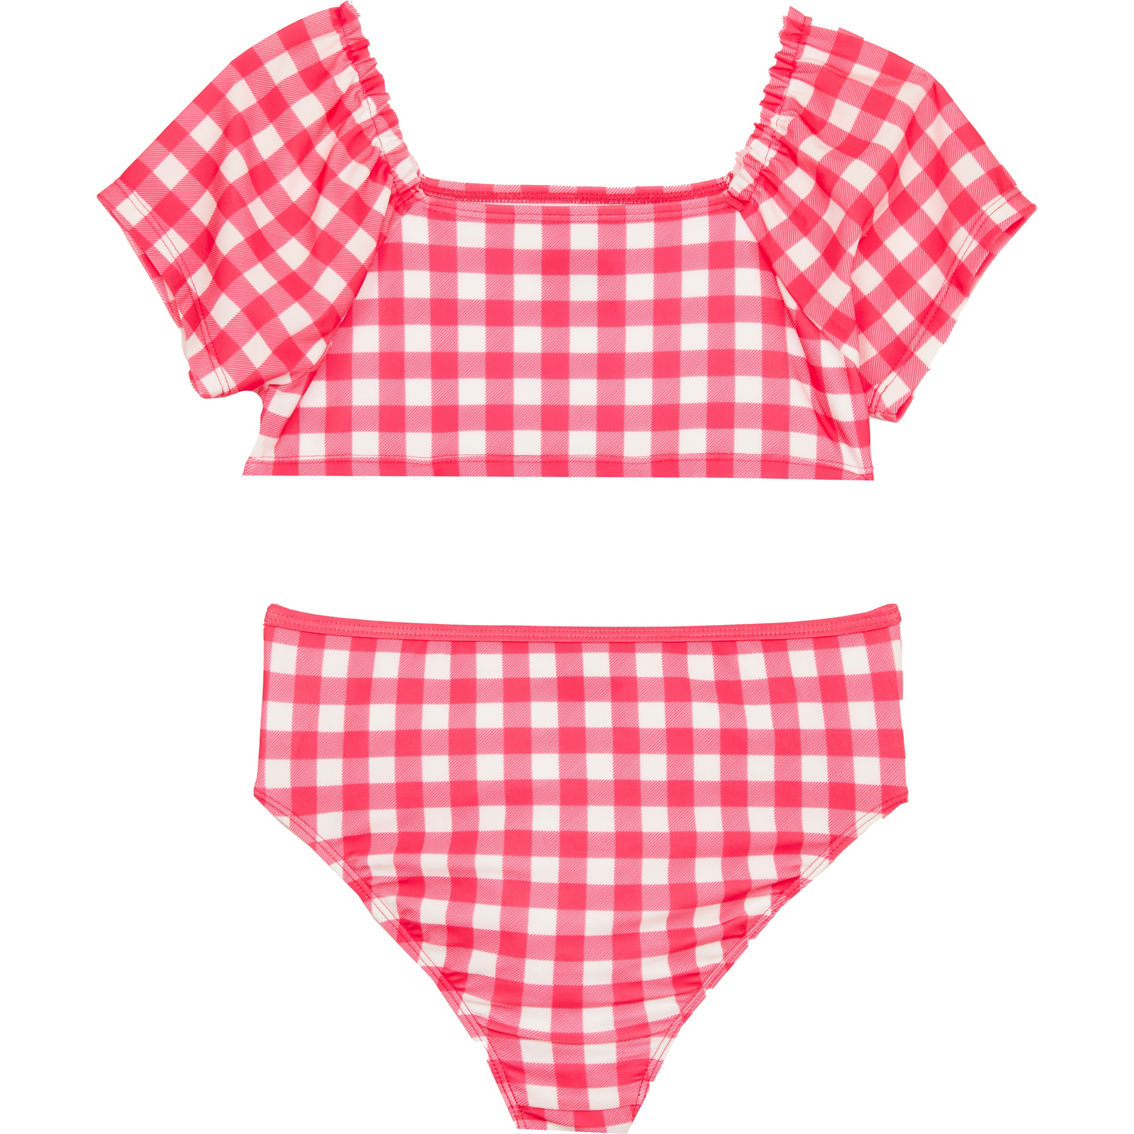 Surf Zone Little Girls Picnic 2 pc. Swimsuit - Image 2 of 2